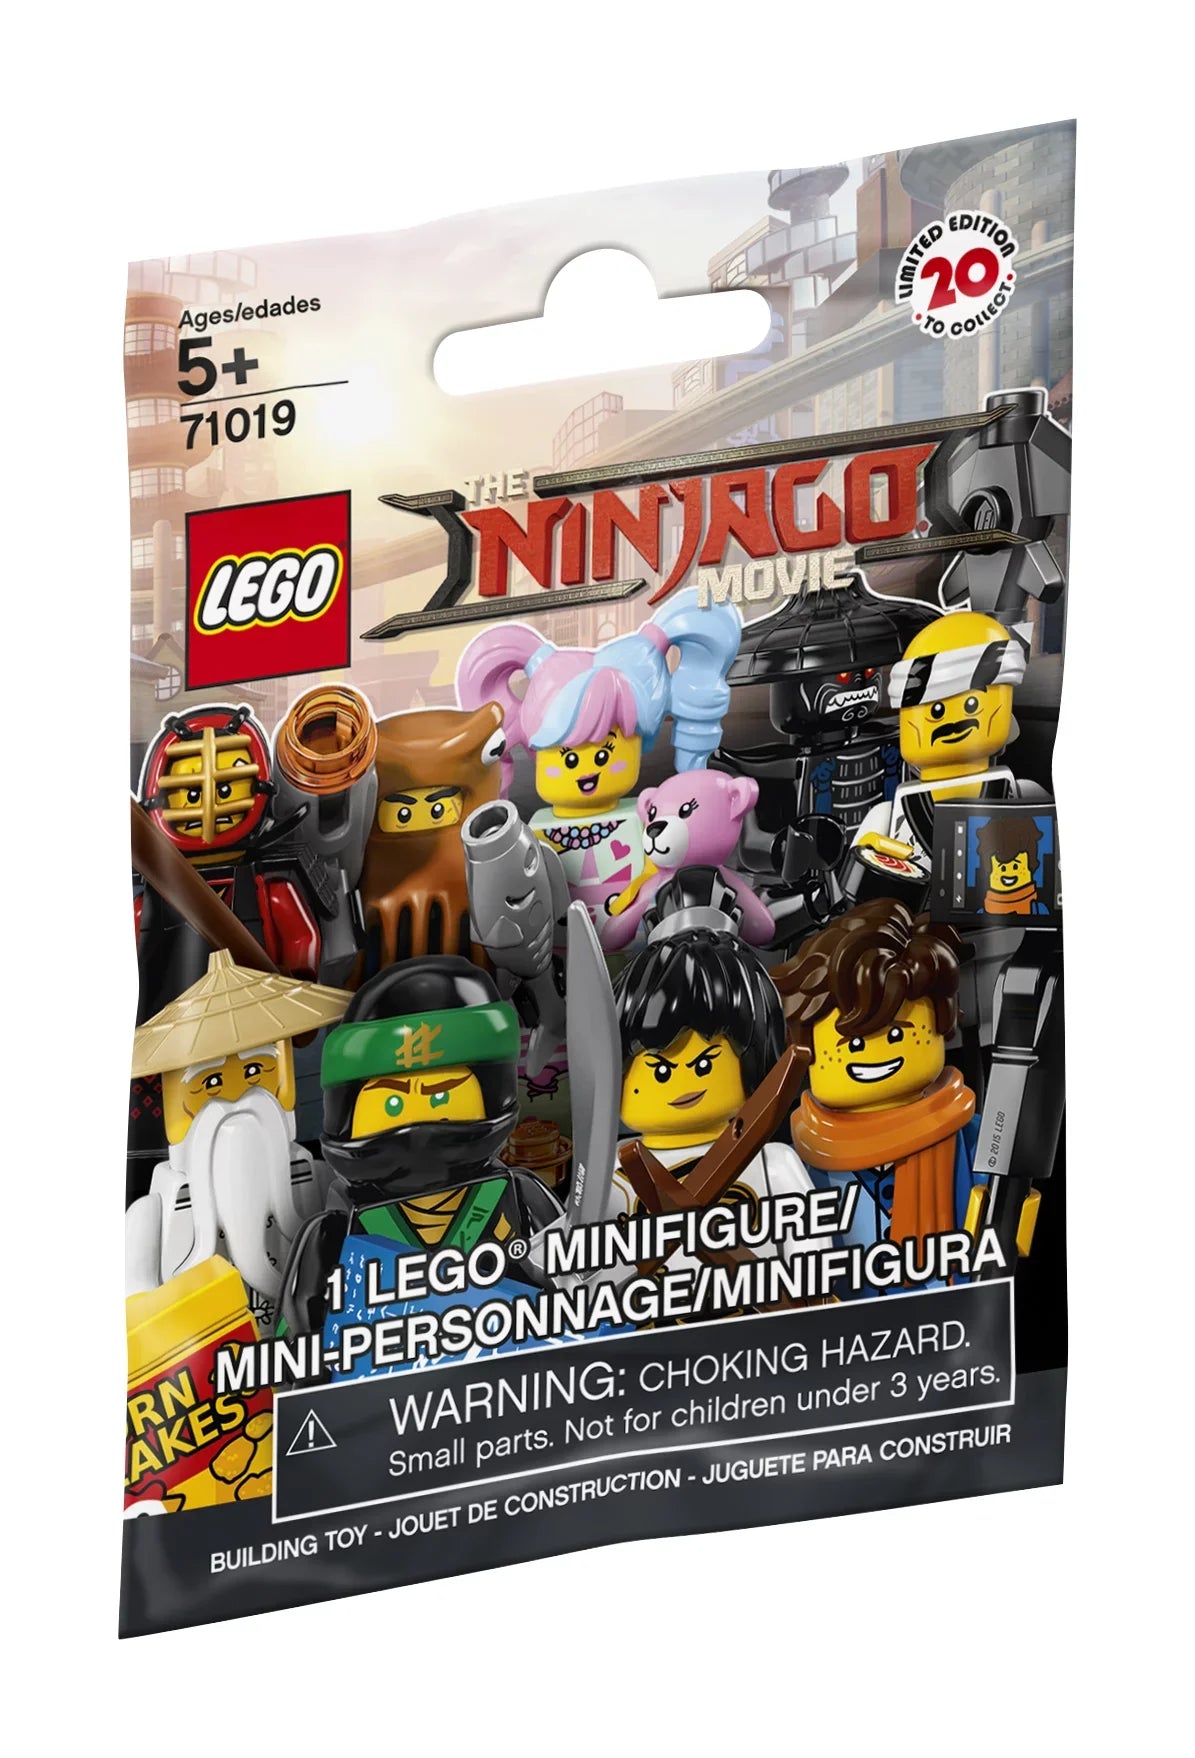 Copy of LEGO Ninjago Movie Series Collectible Minifigure Pack 71019 (Alt Packaging)